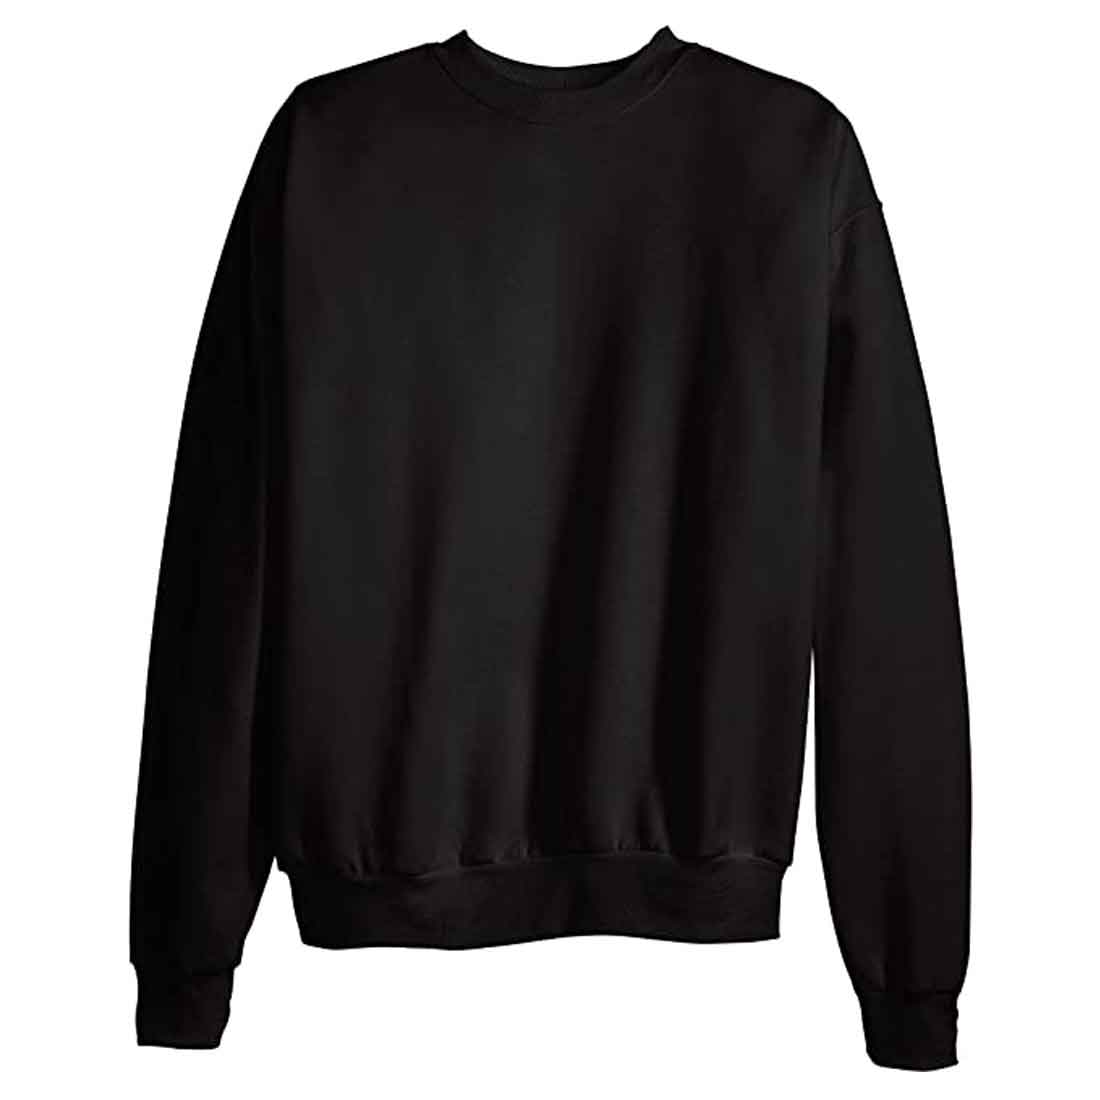 Personalized Sweatshirts for Men Round Neck - Add Name